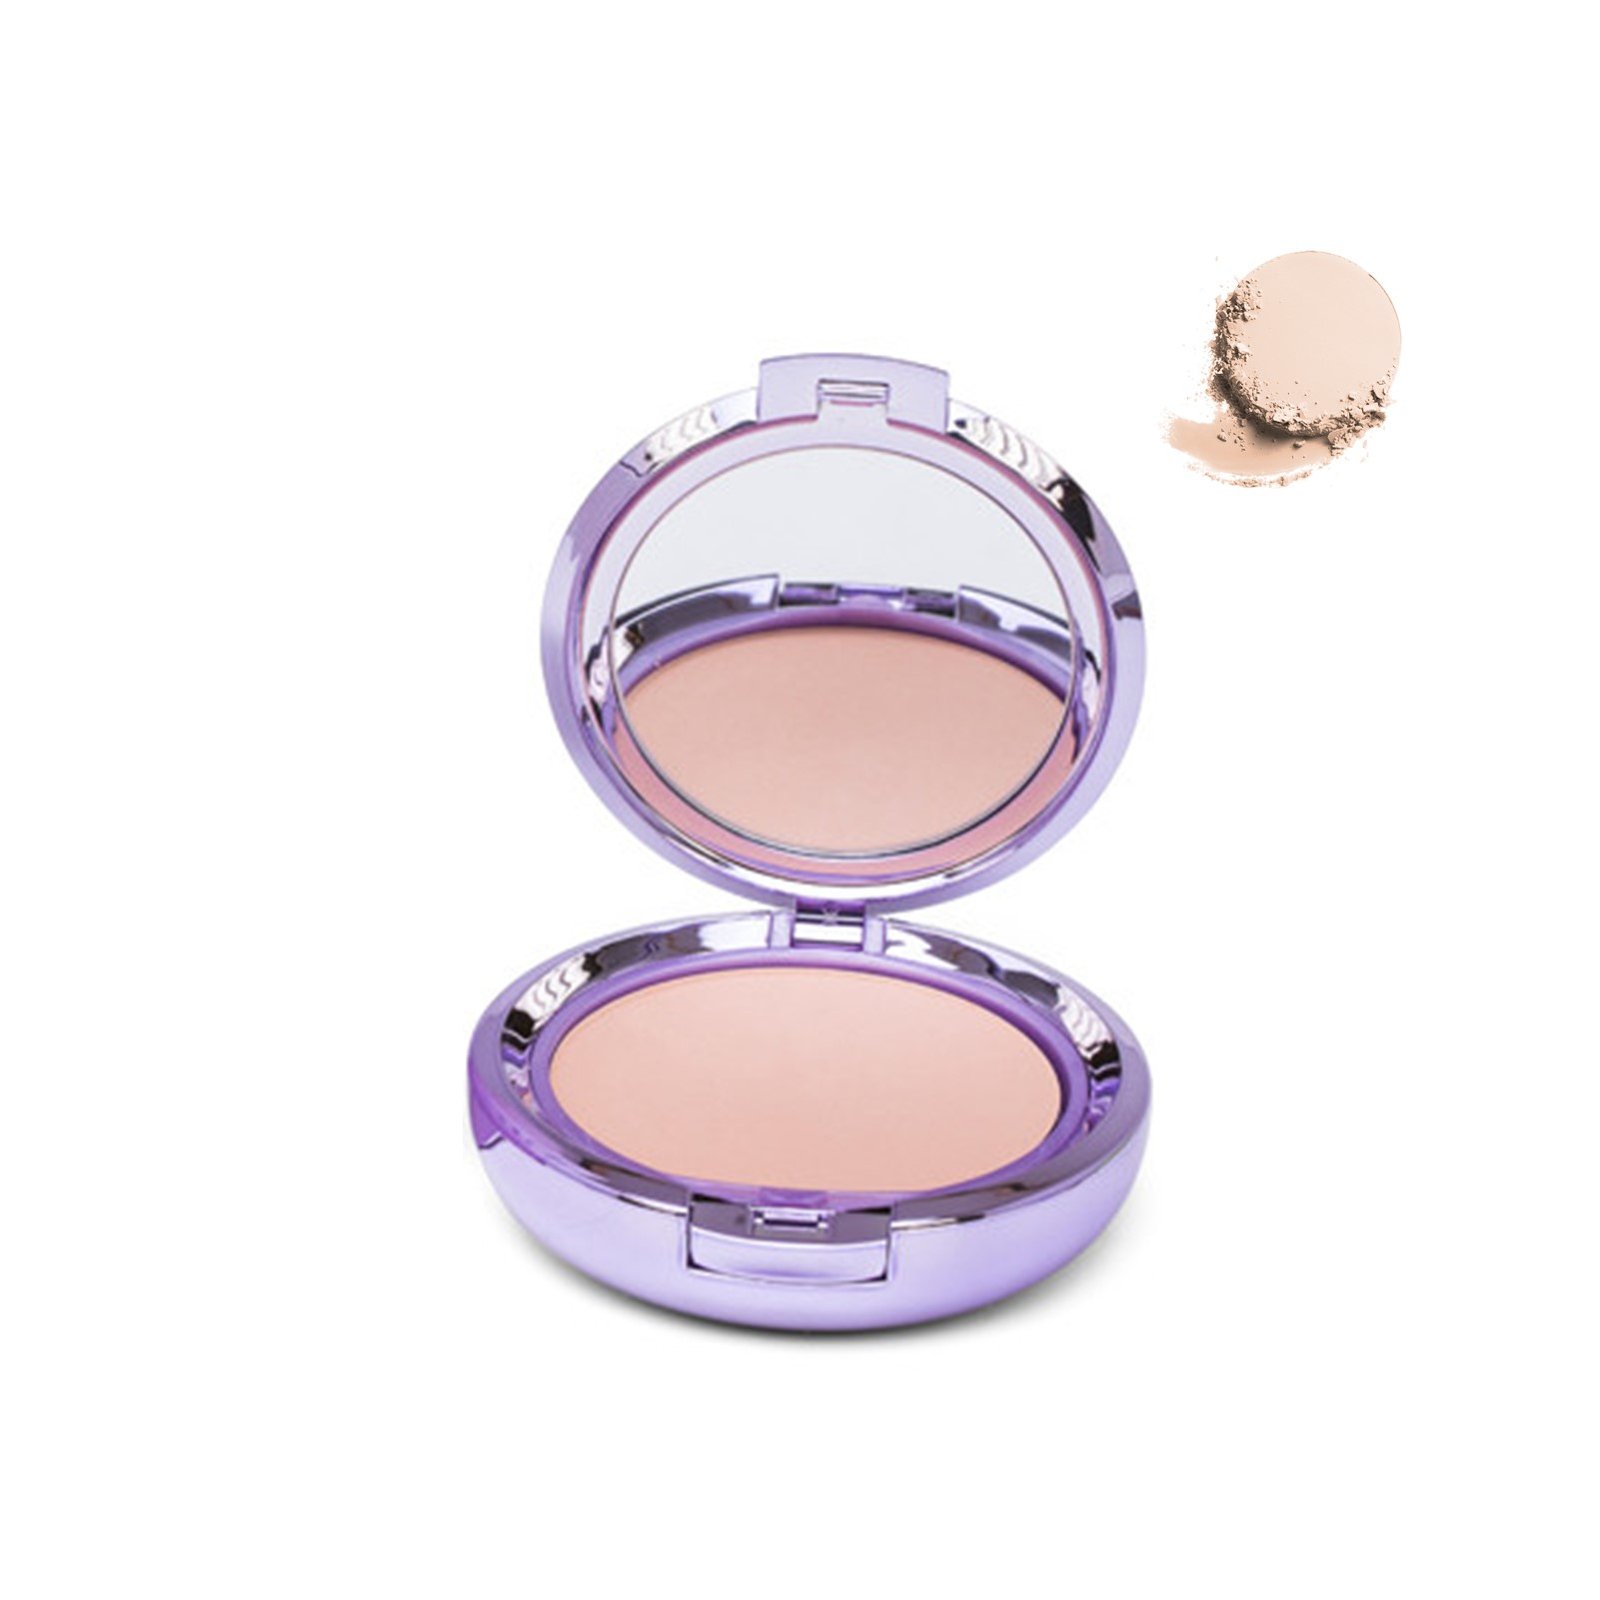 Covermark Compact Powder Normal Skin 1 10g